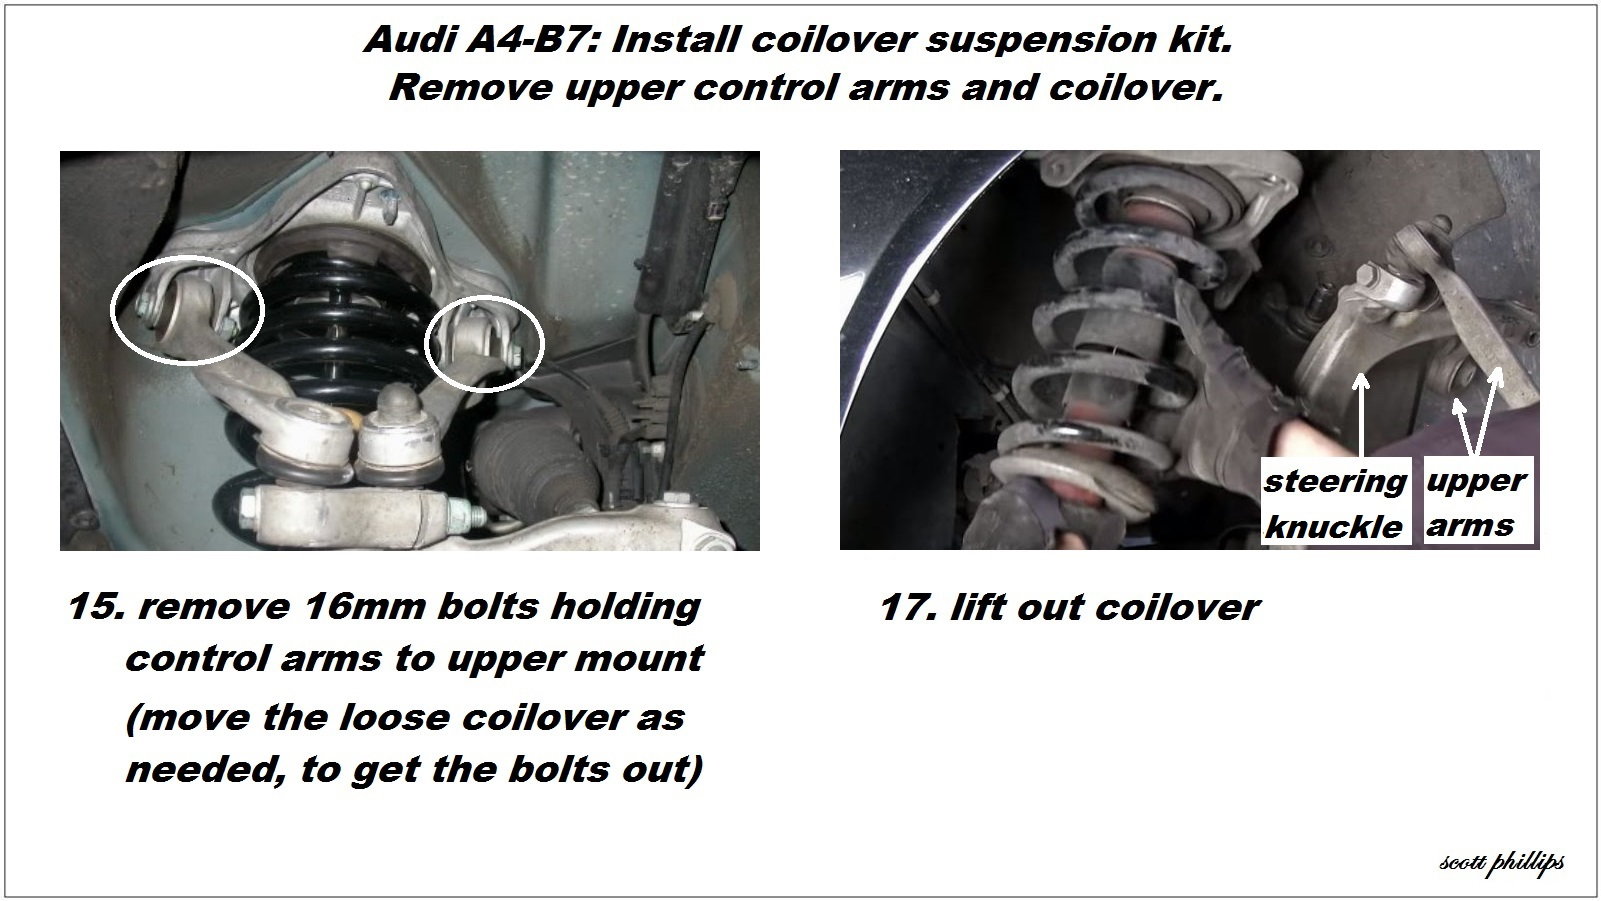 Remove upper arms and coilover